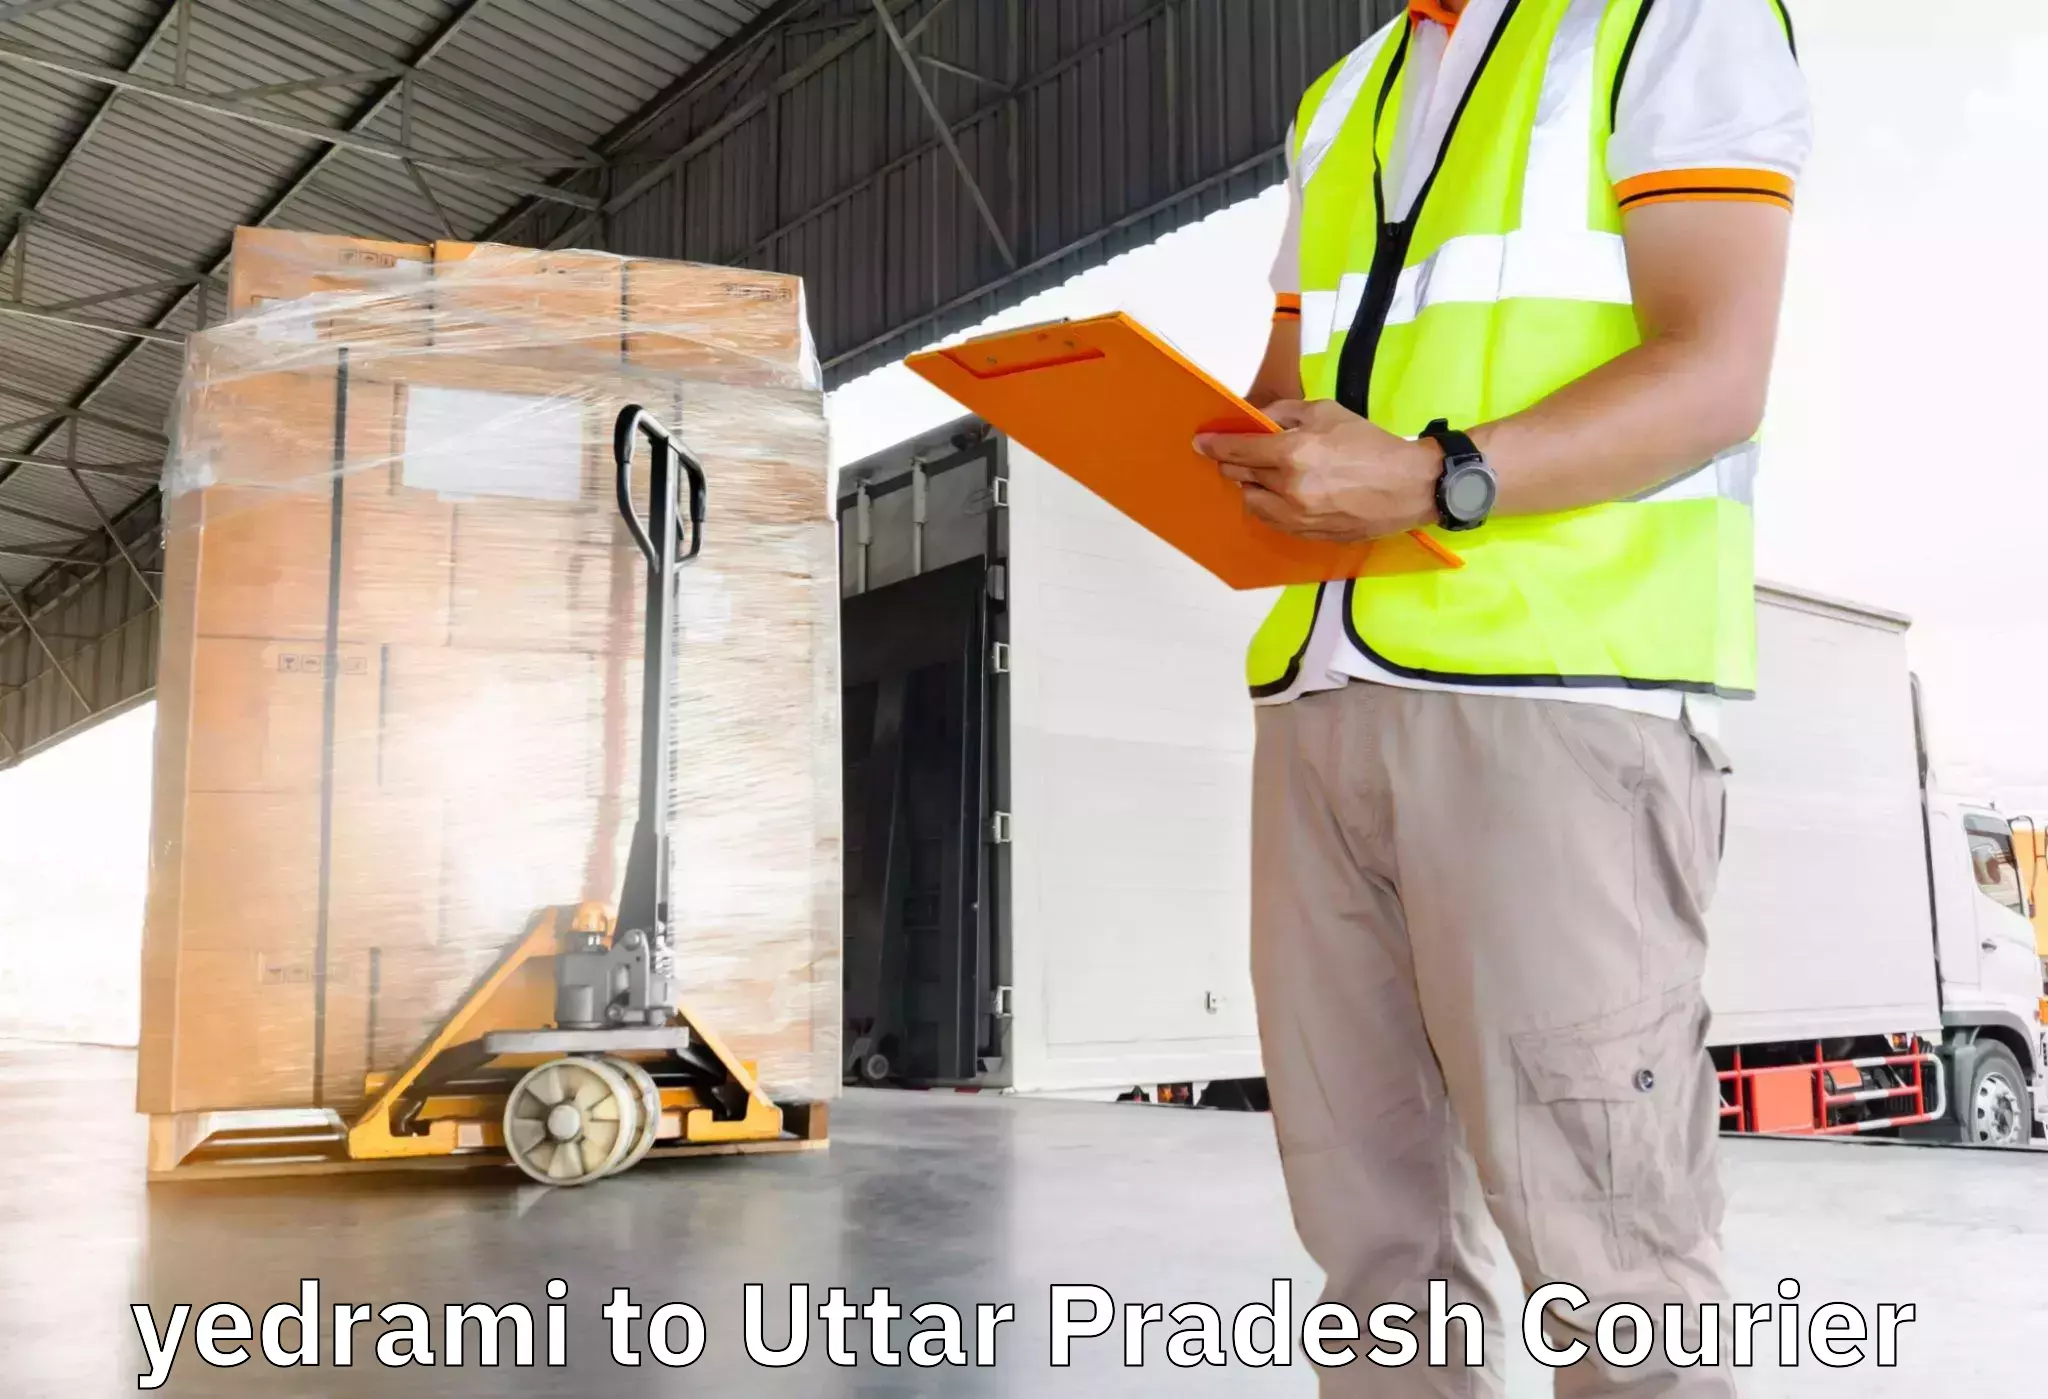 High-quality moving services in yedrami to Sarai Meer